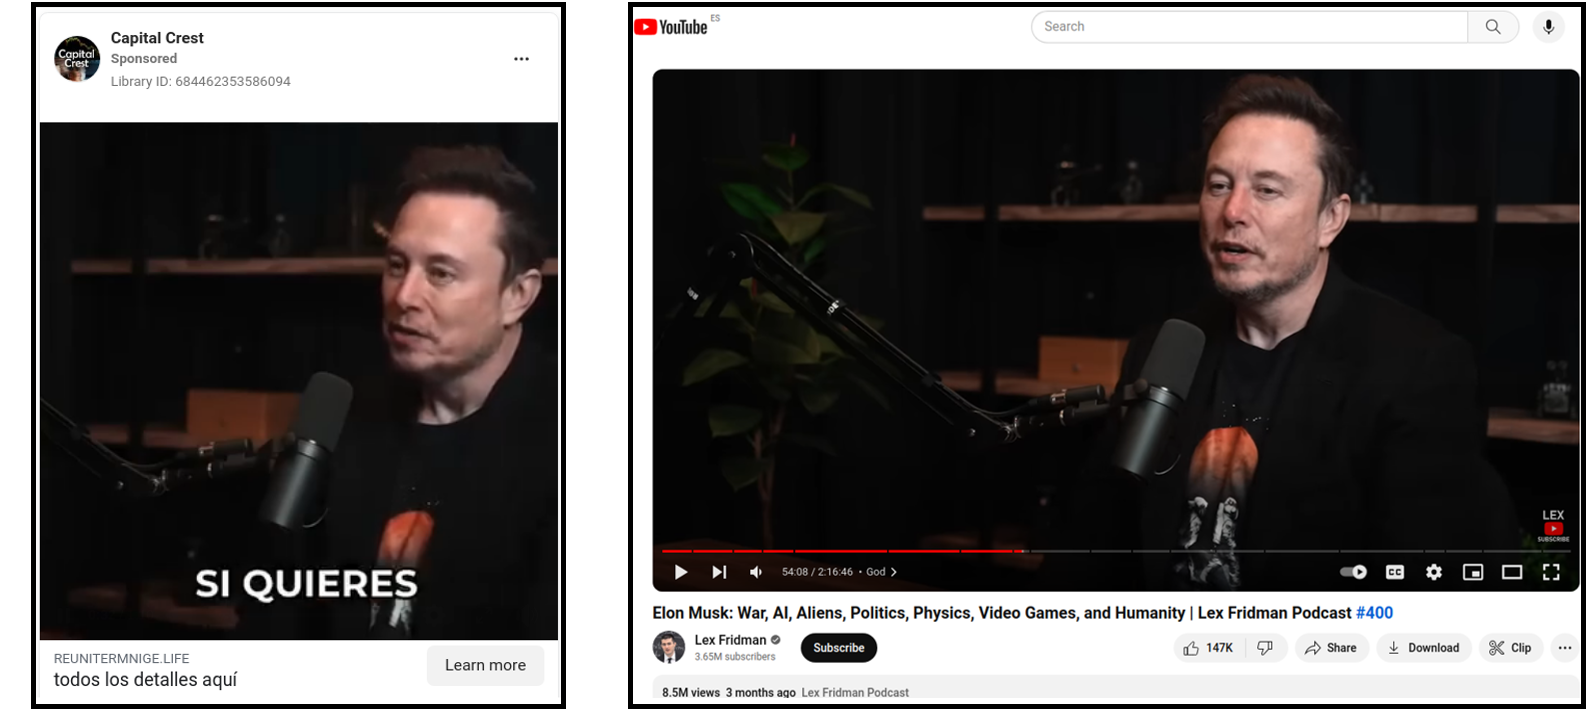 Screenshot (left) of a video with forged audio of Elon Musk promoted by dubious Facebook page Capital Crest between January 22-24, 2024. The original video (right) was sourced from an interview broadcast on November 9, 2023. (Source: Capital Crest, left; Lex Fridman, right)